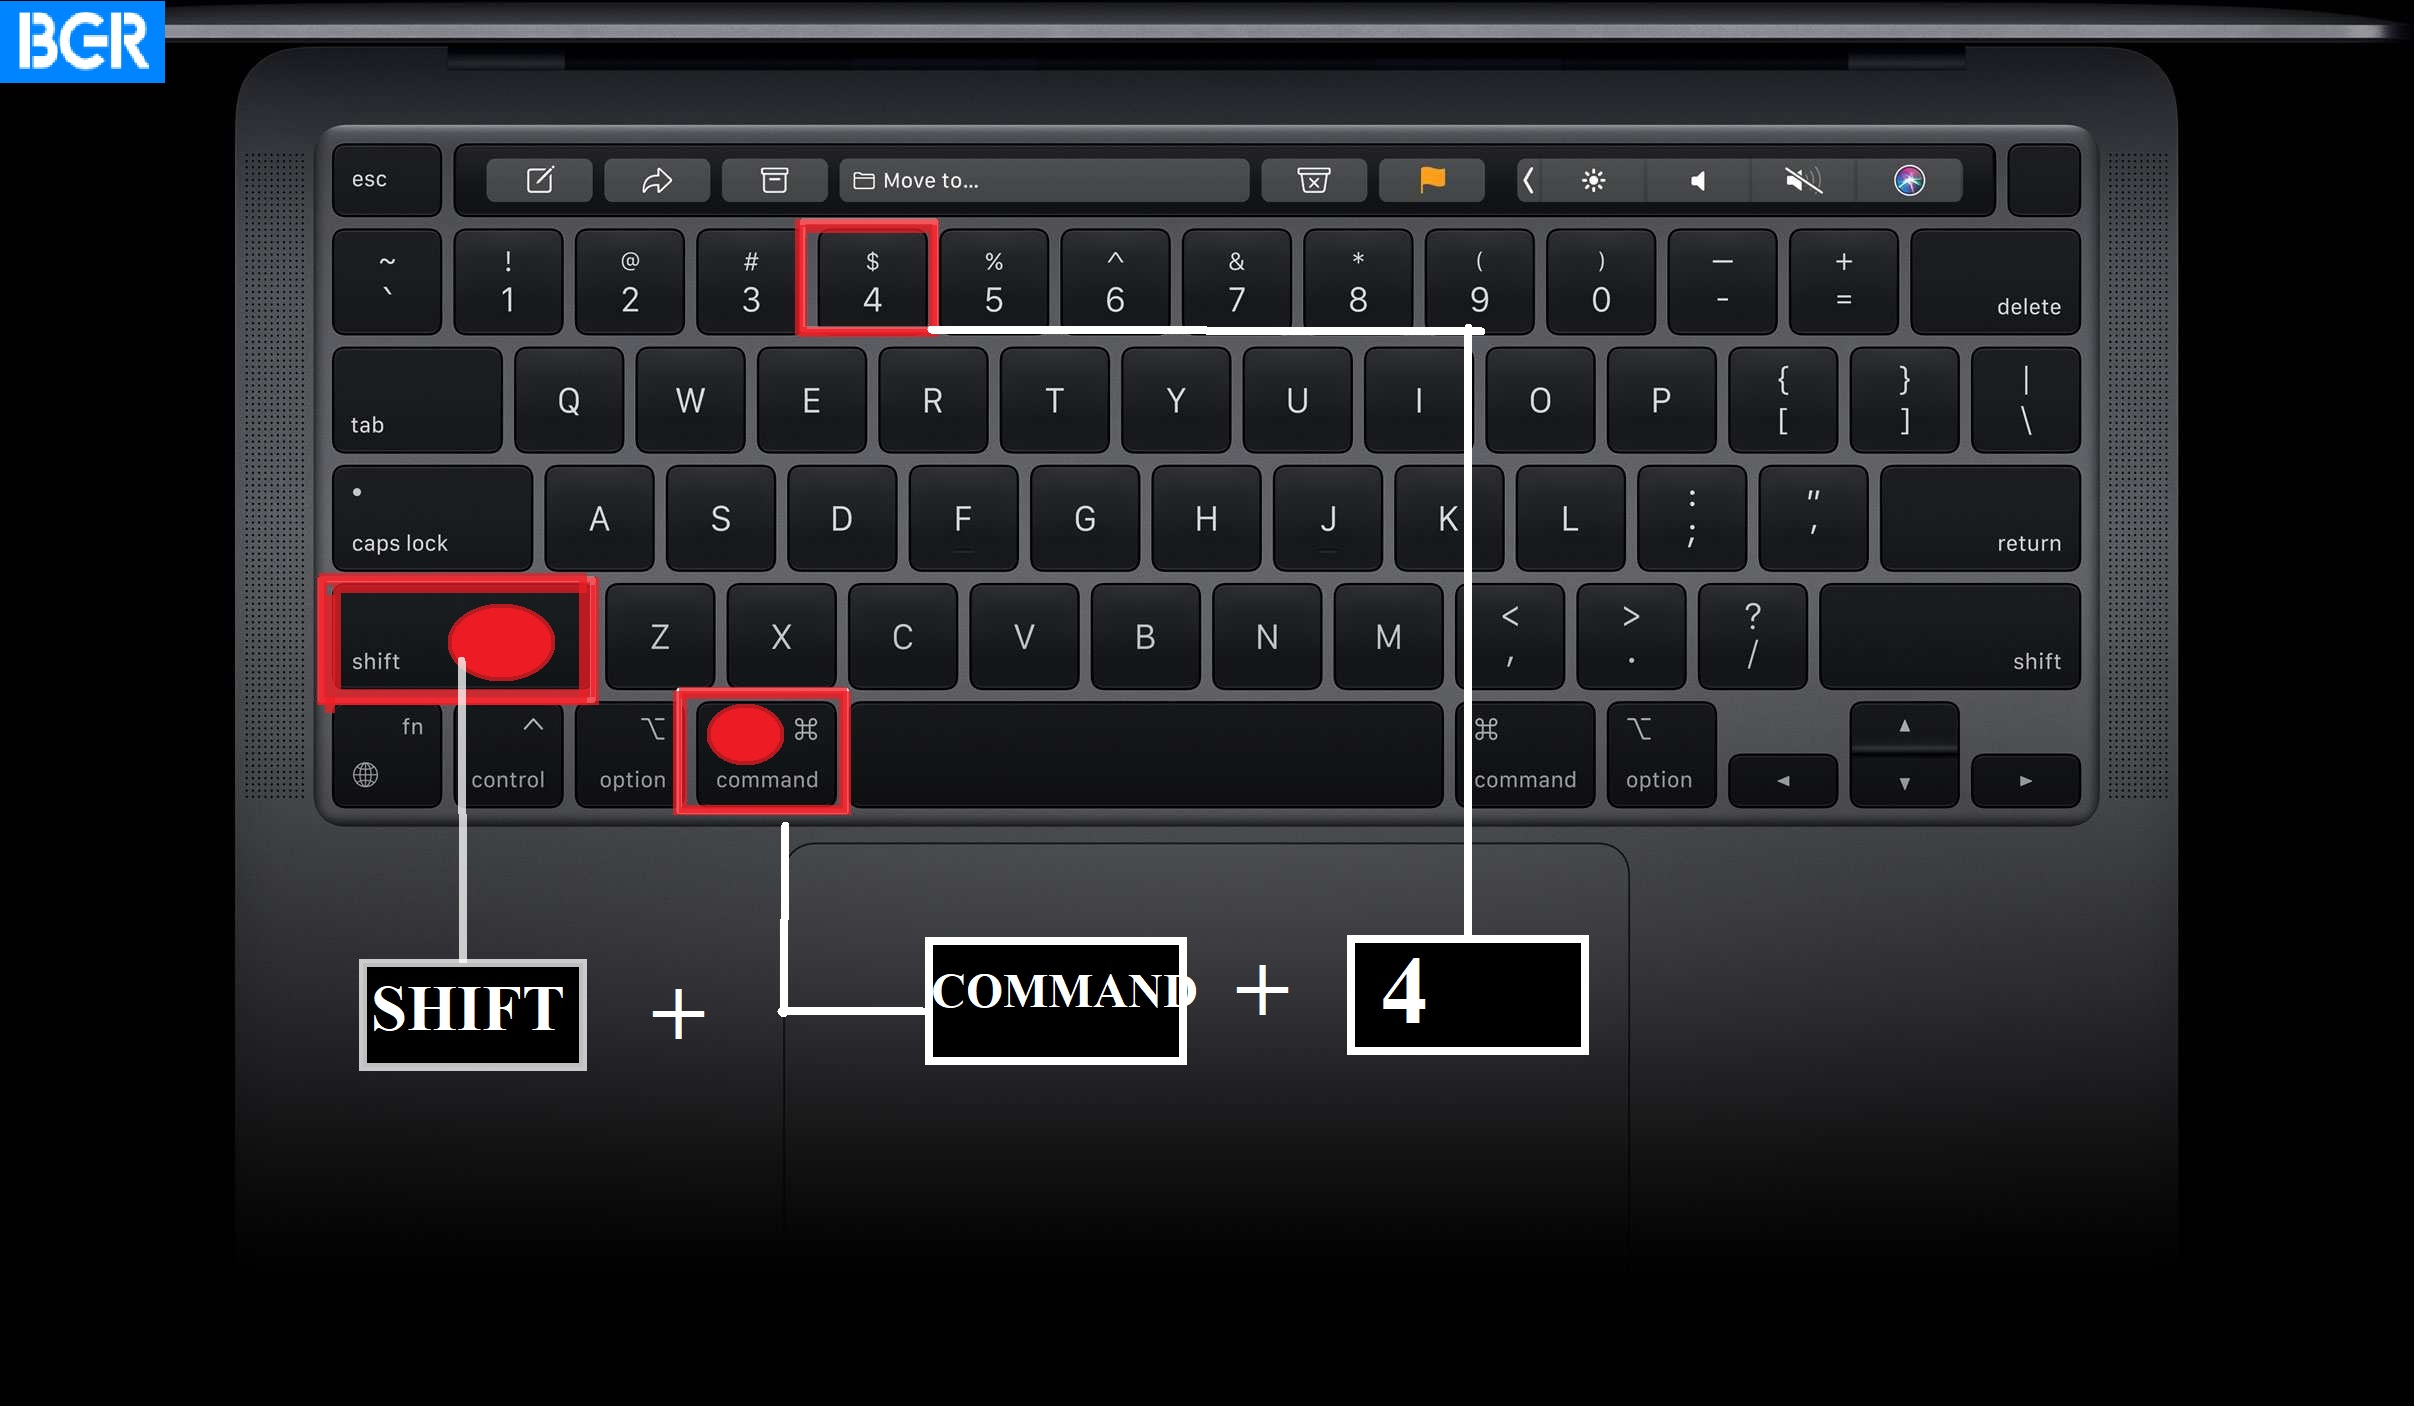 Press the keys labelled on the image all at the same time